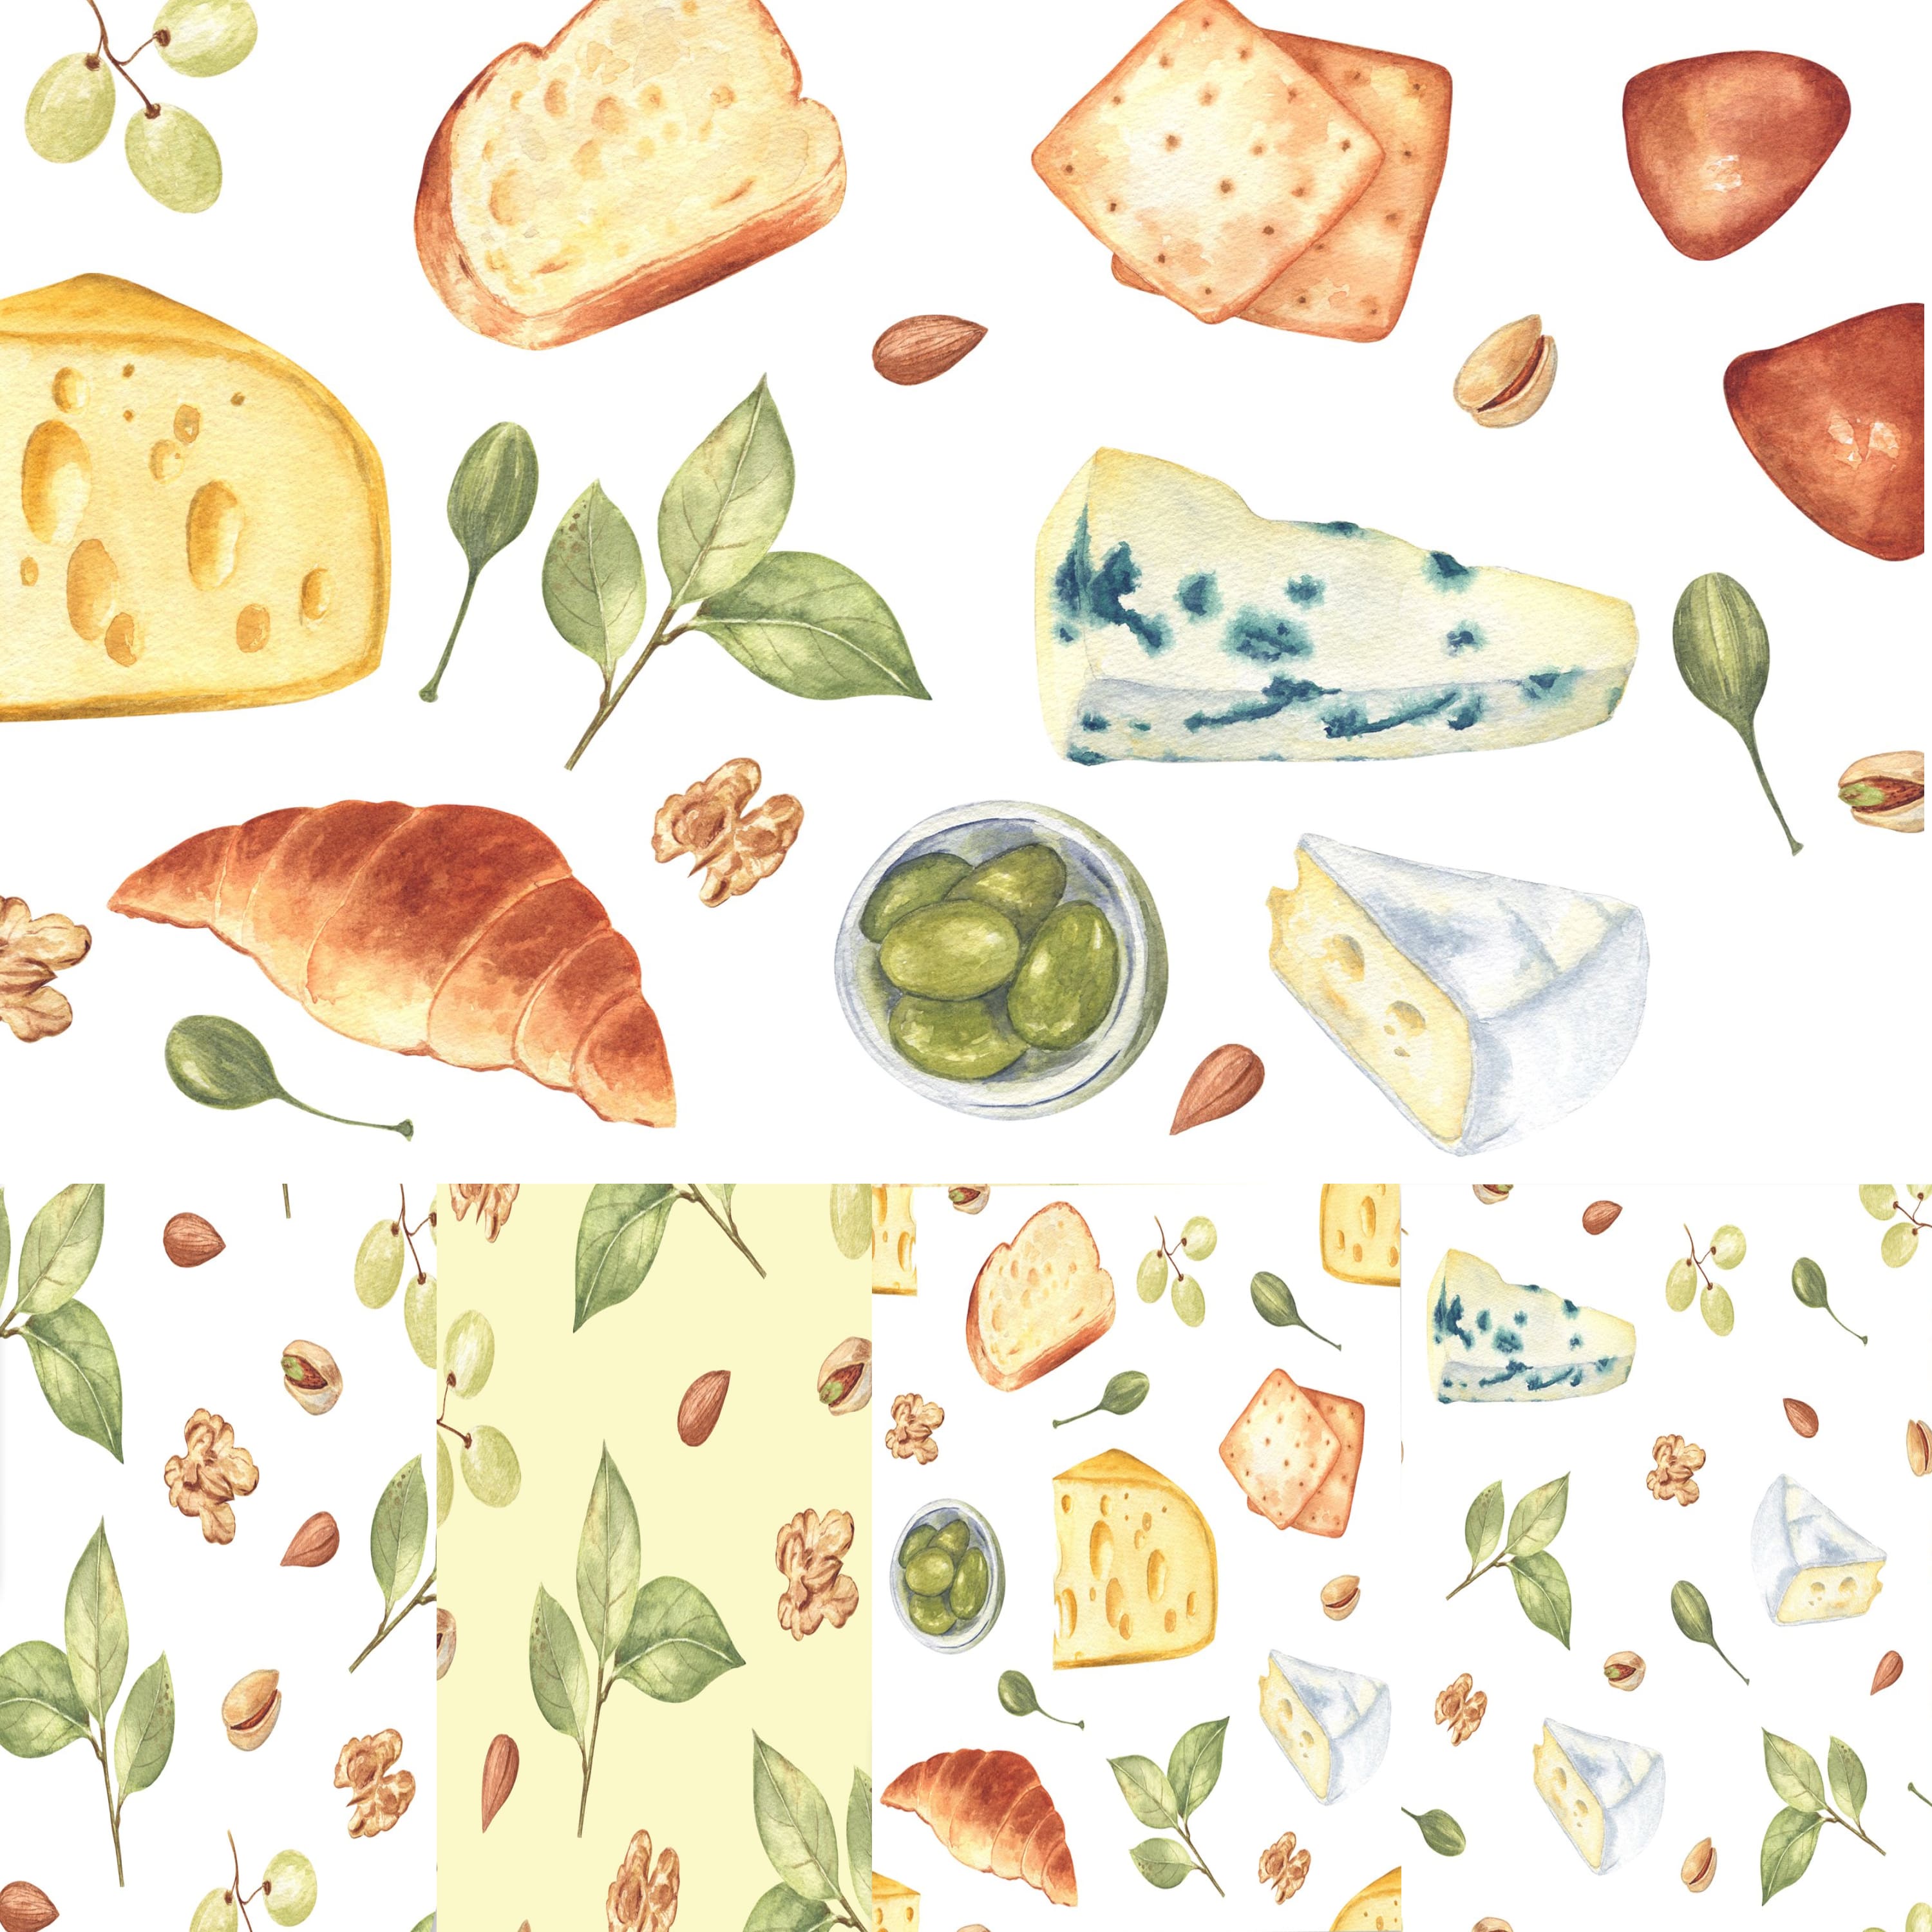 Set of colorful watercolor images of hard cheese and snacks.